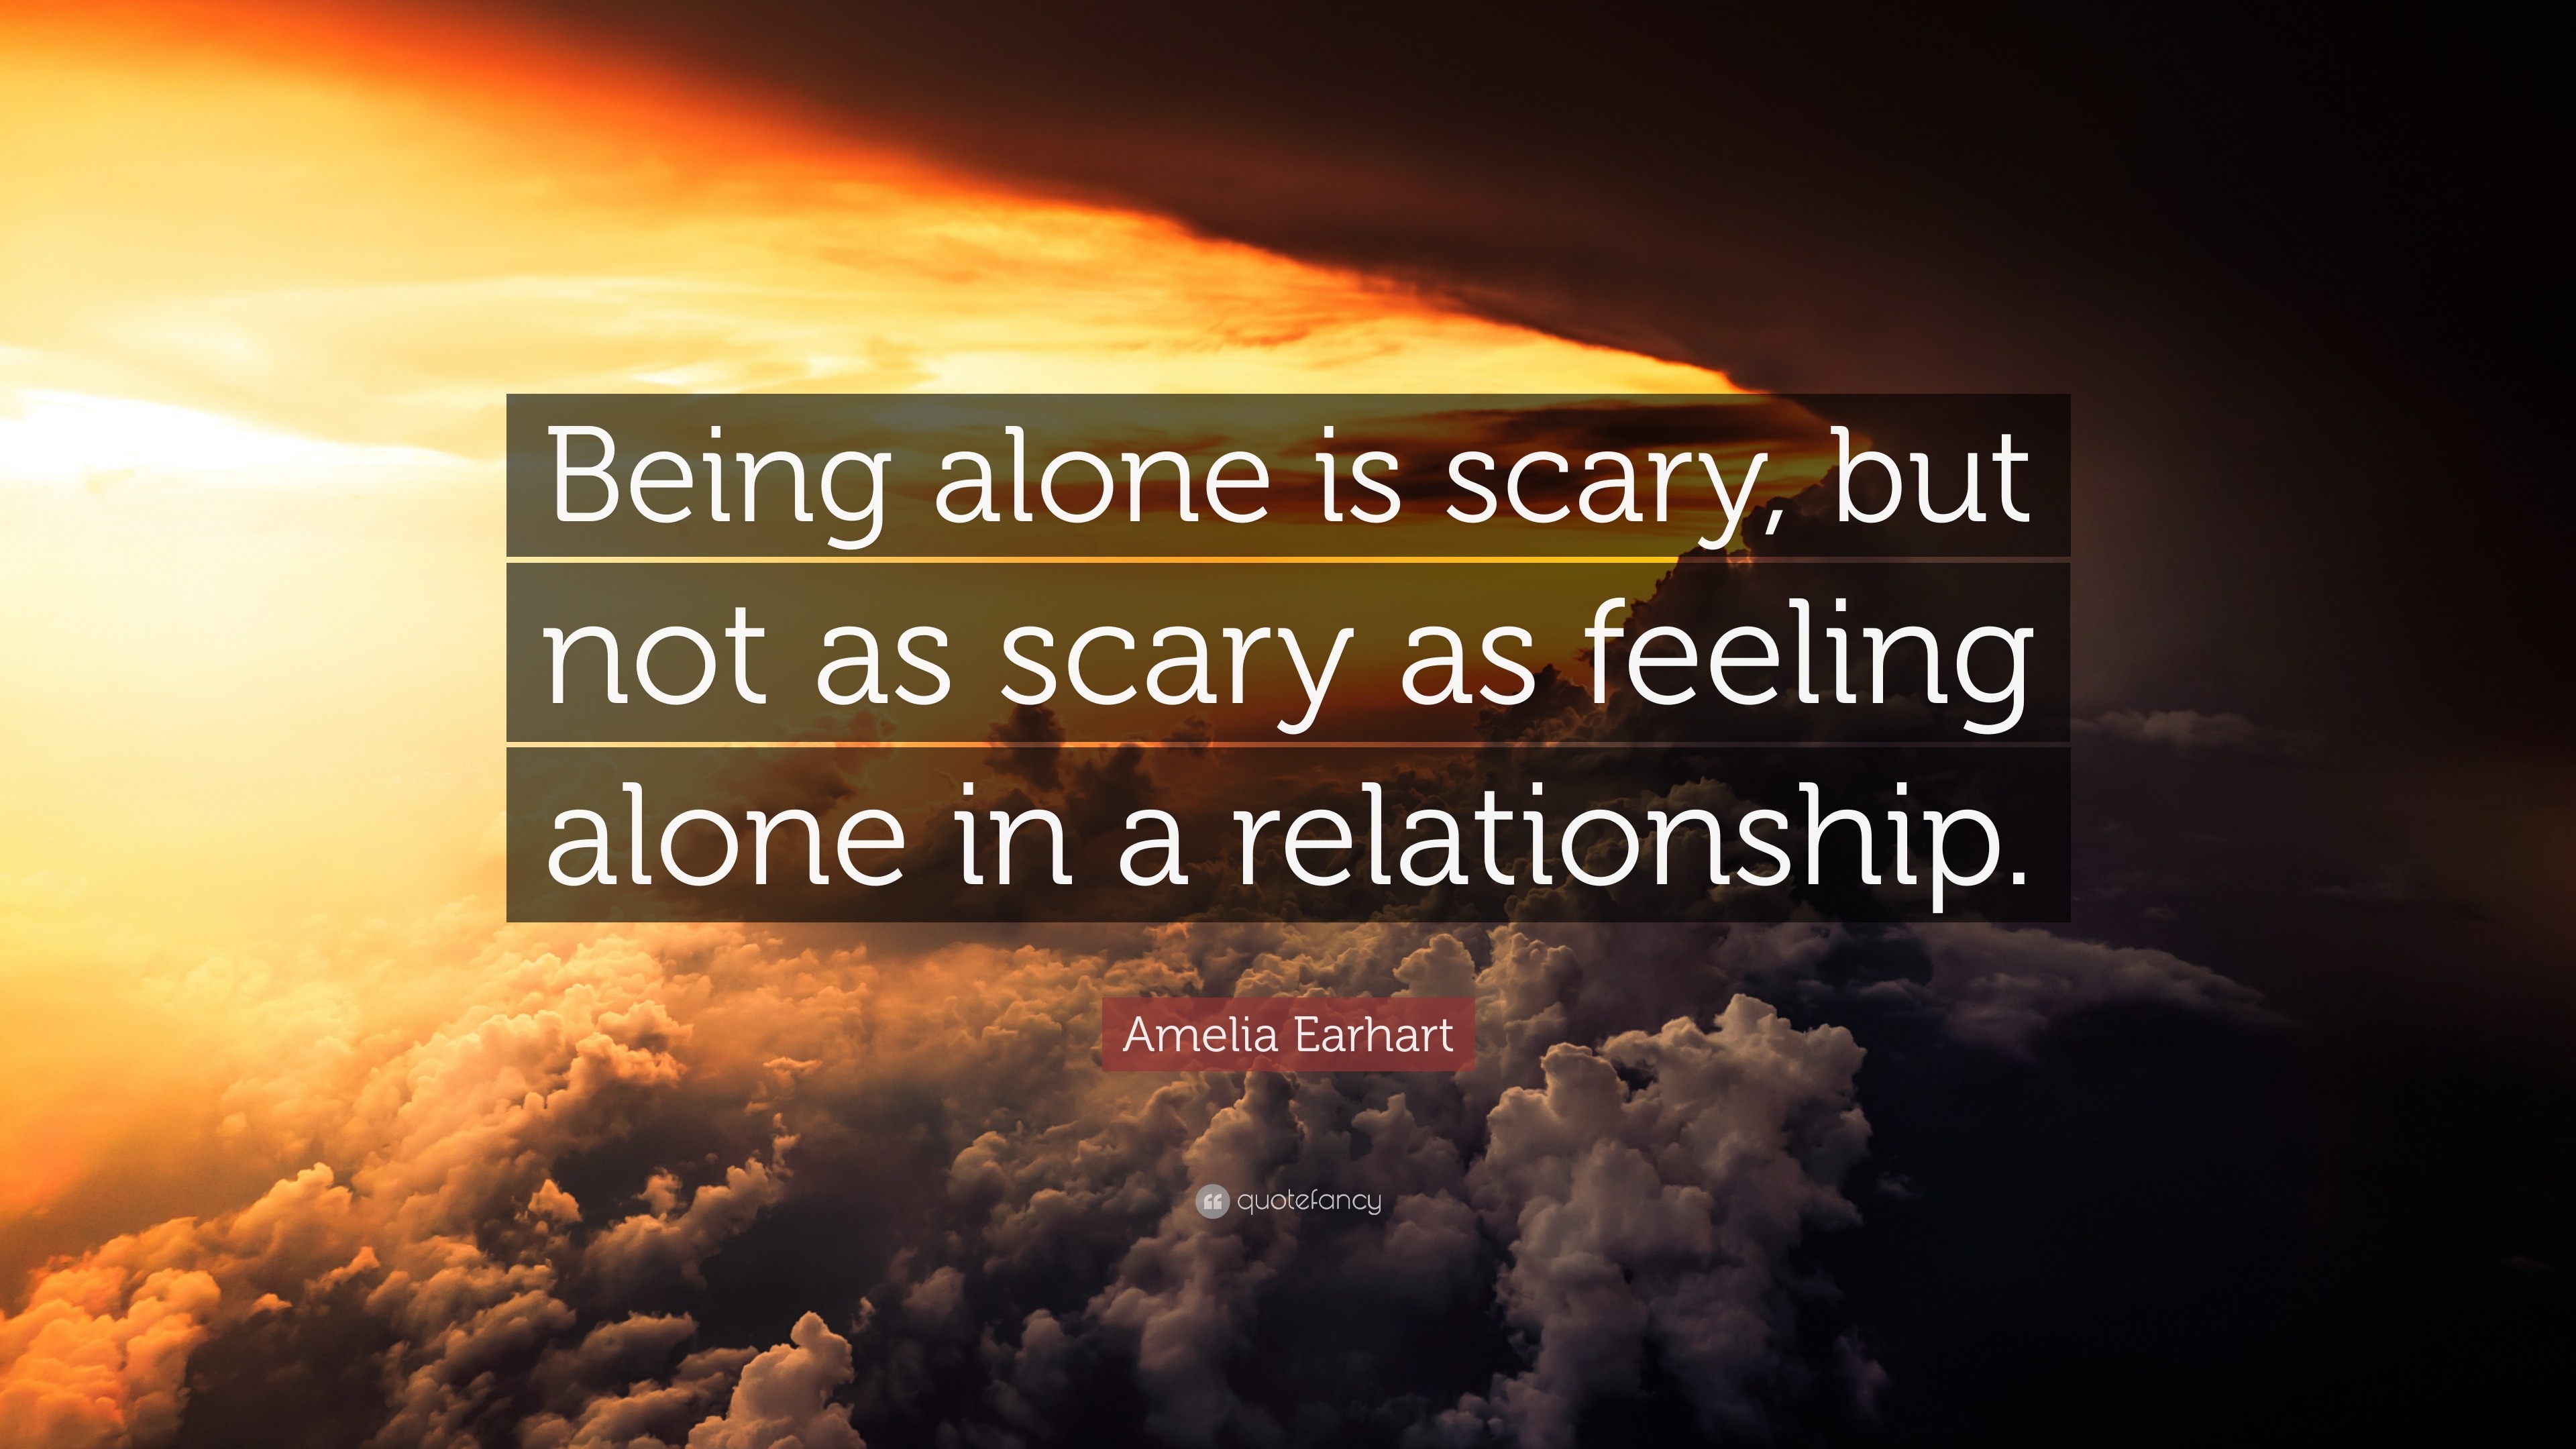 Amelia Earhart Quote: “Being alone is scary, but not as scary as ...